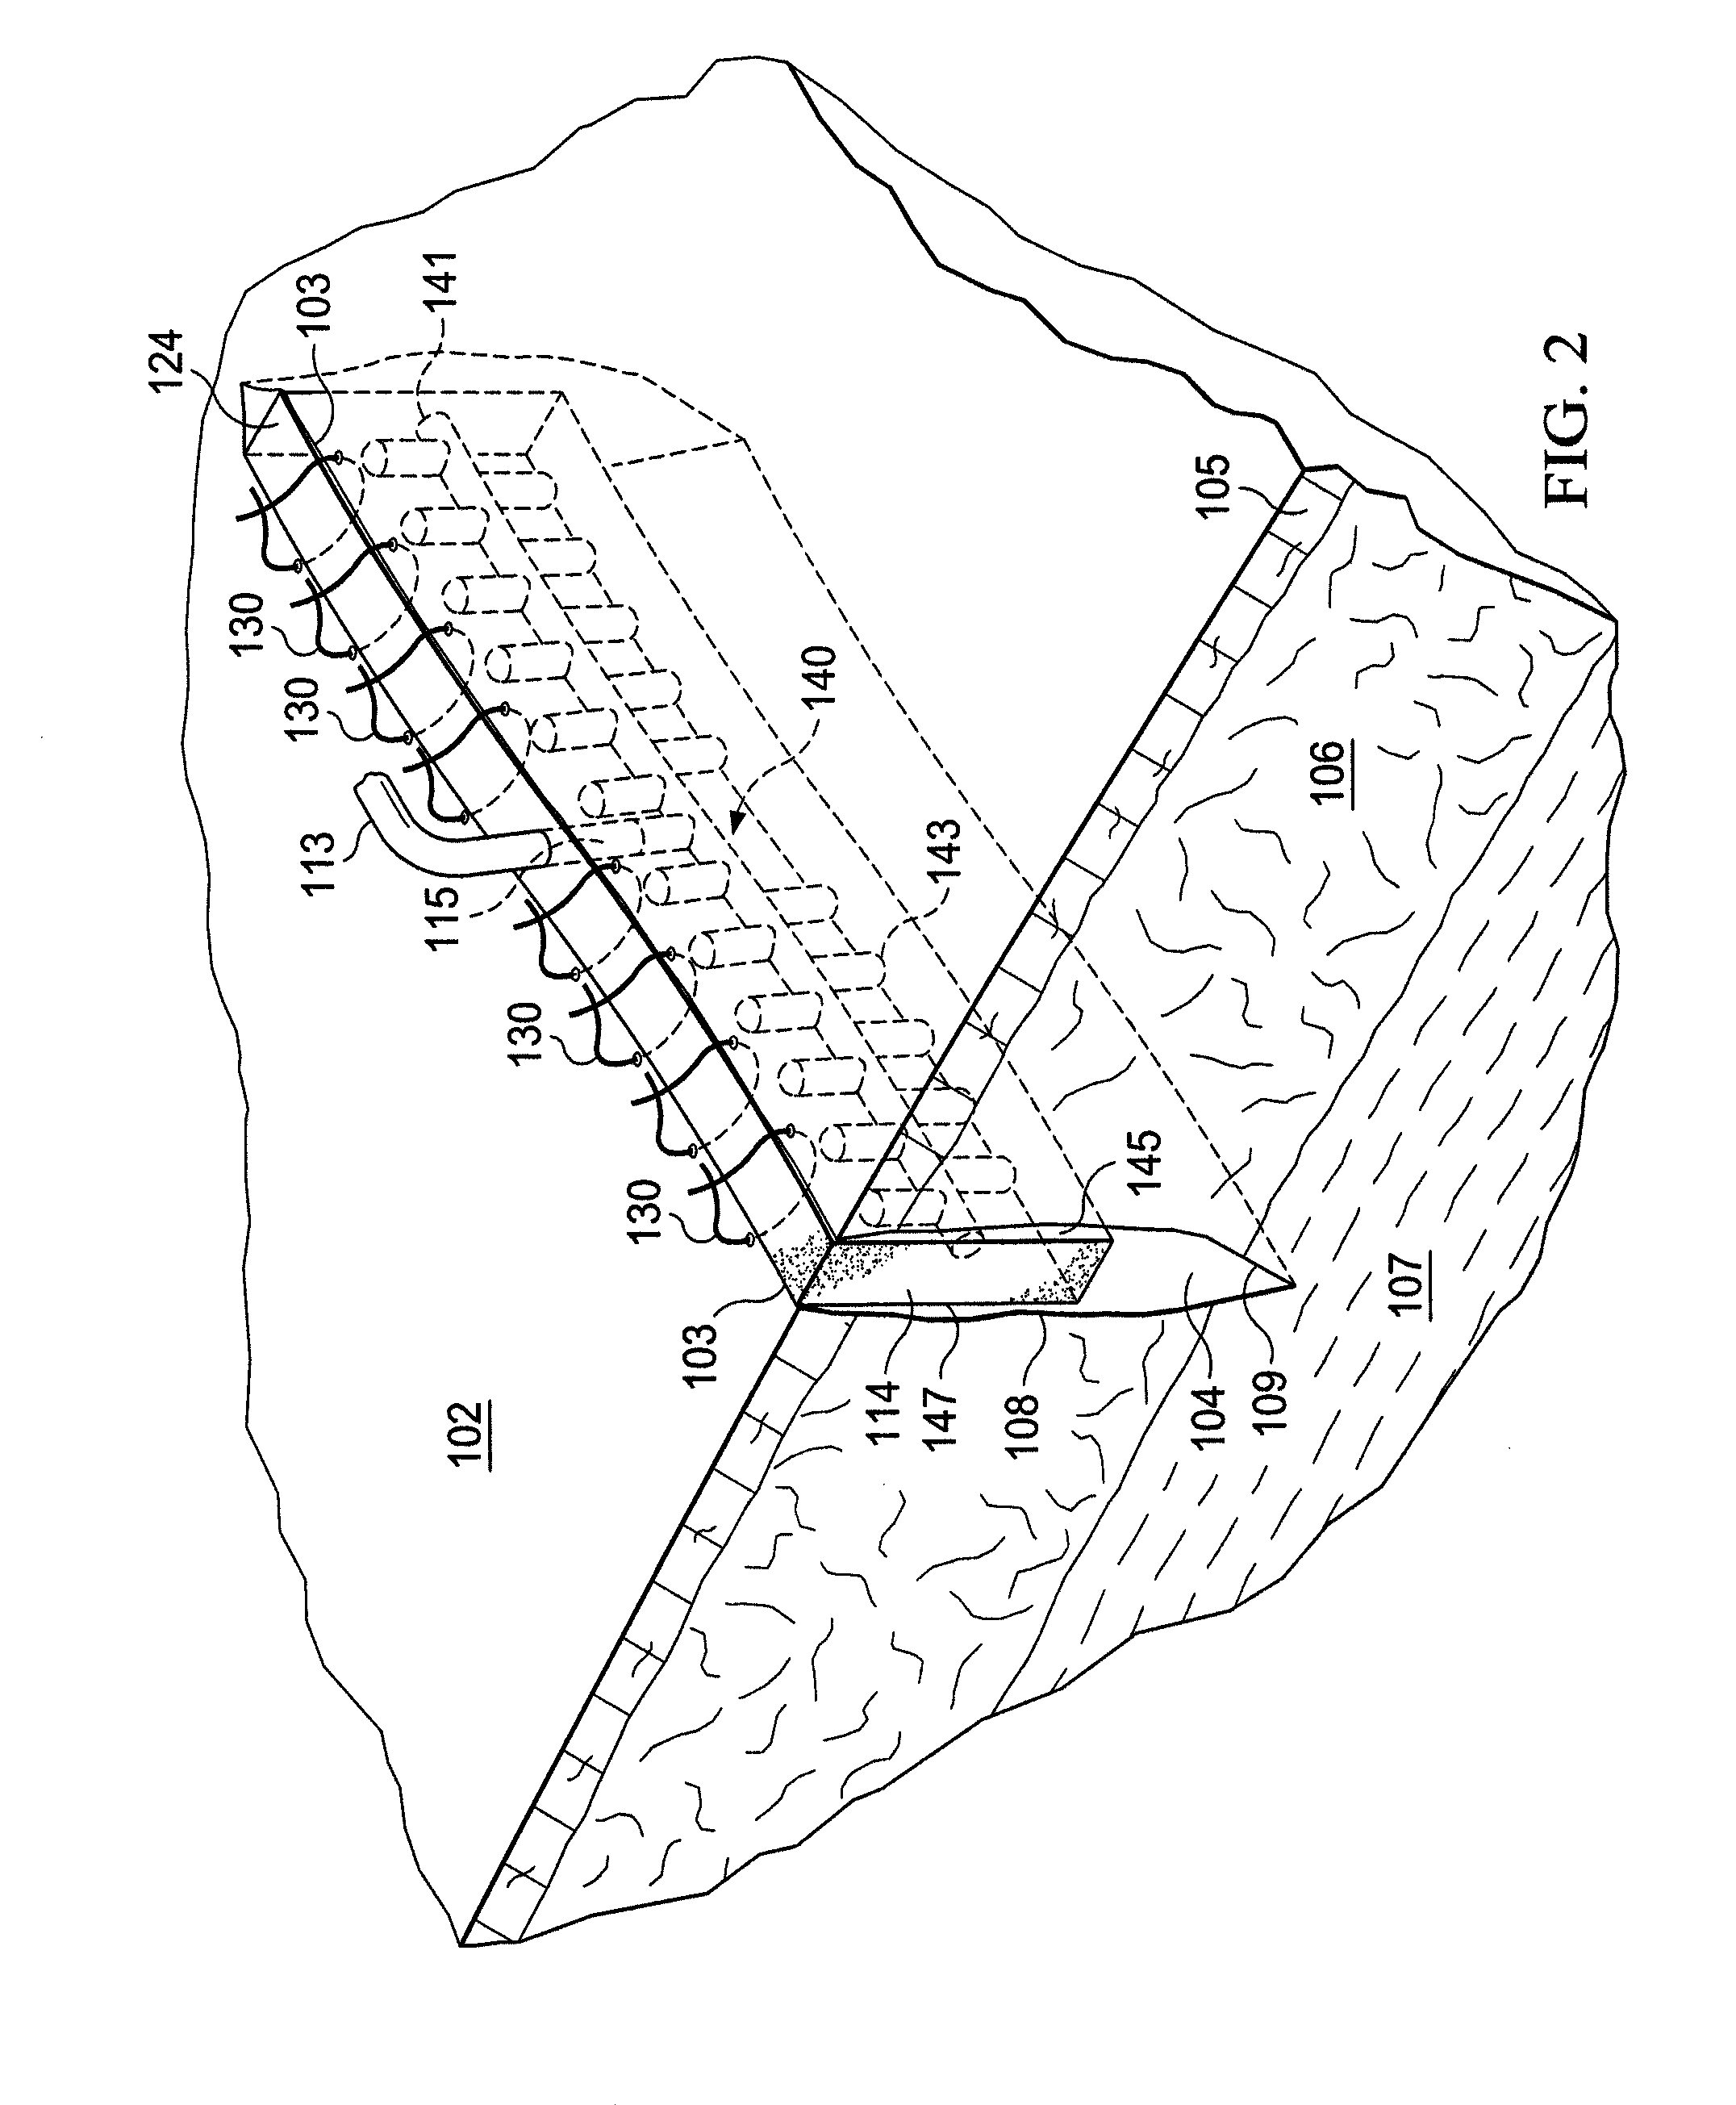 System and method for sealing an incisional wound